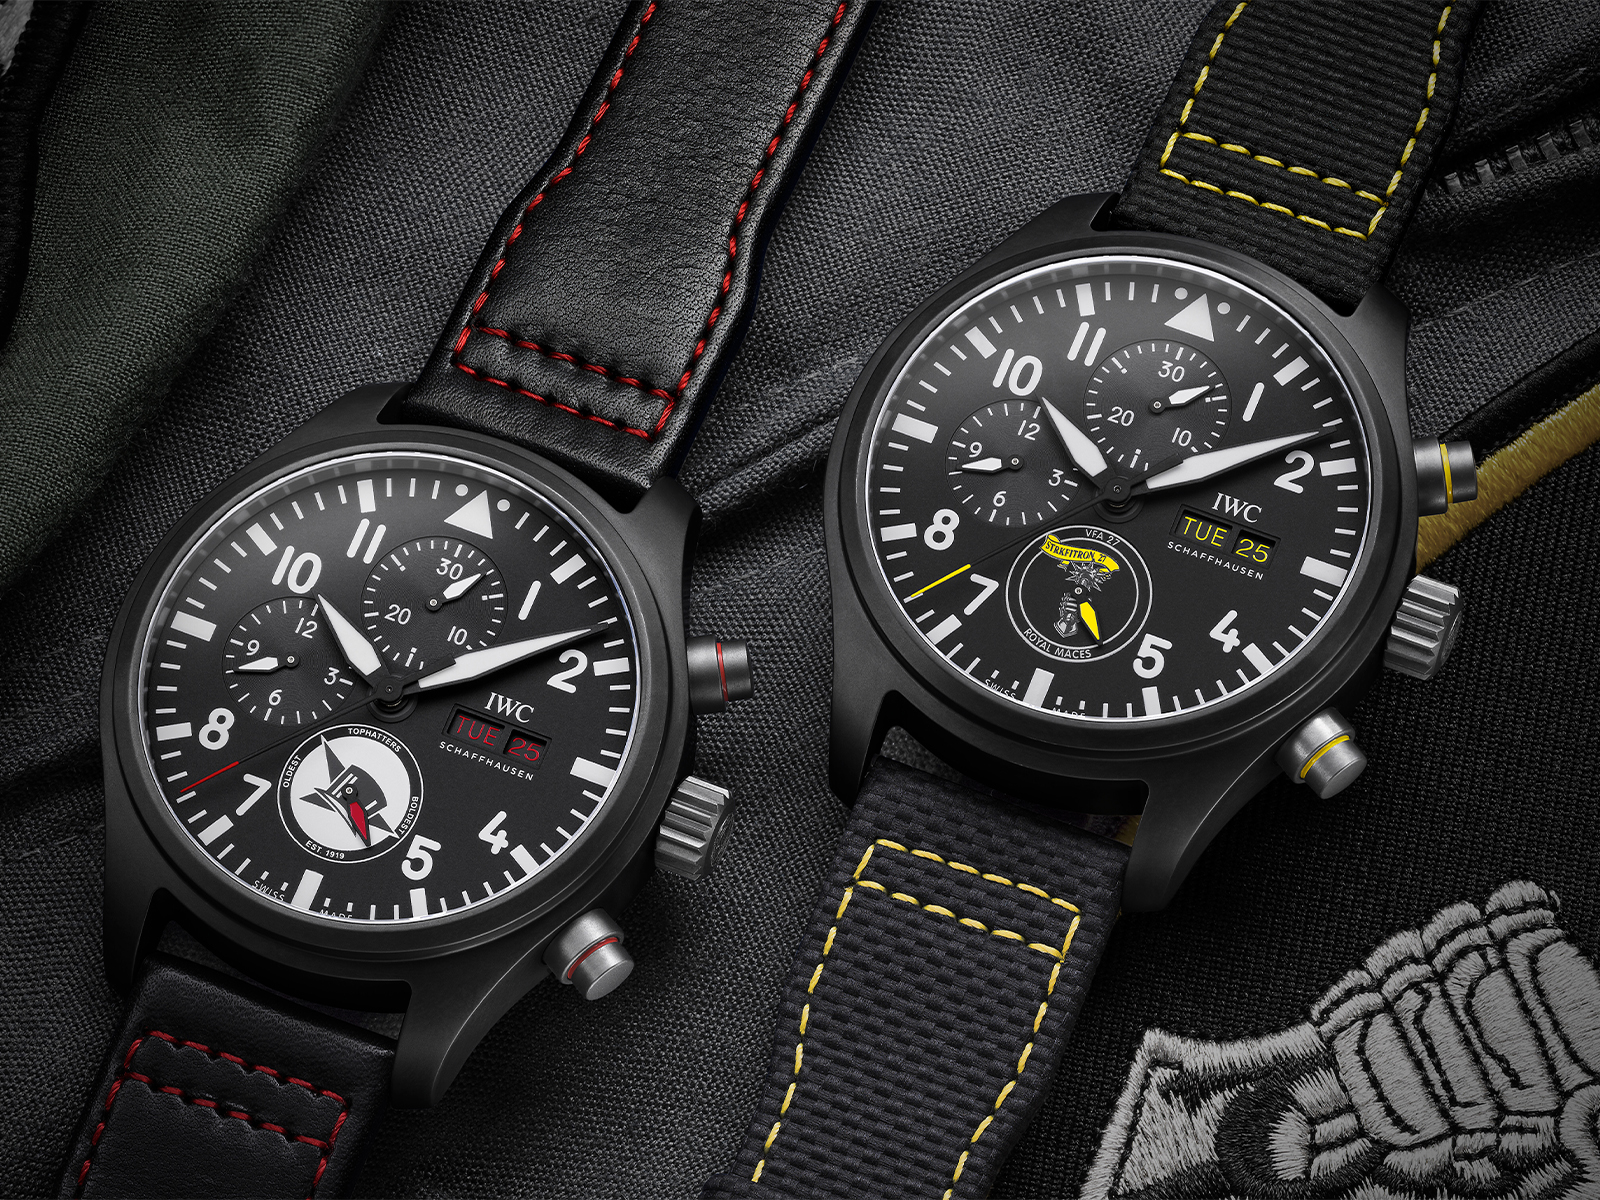 The New IWC Pilots Watches 0001 iw389108 iw389107 mood